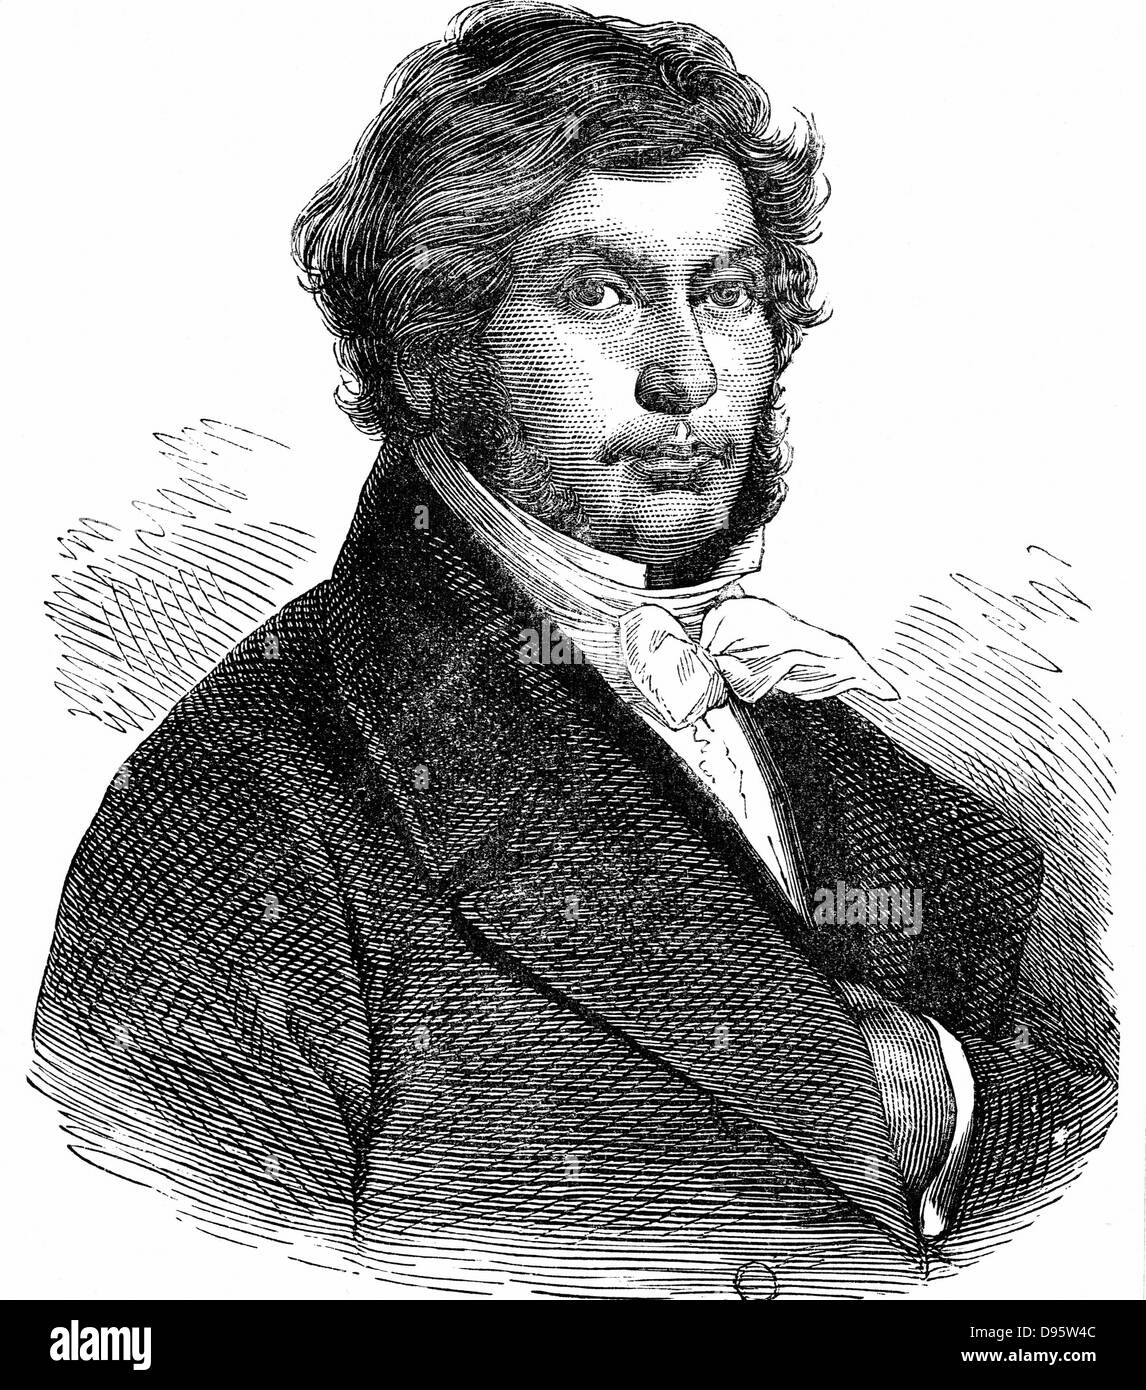 Jean Francois Champollion (1790-1832) French historian, linguist and Egyptologist. Engraving. Stock Photo